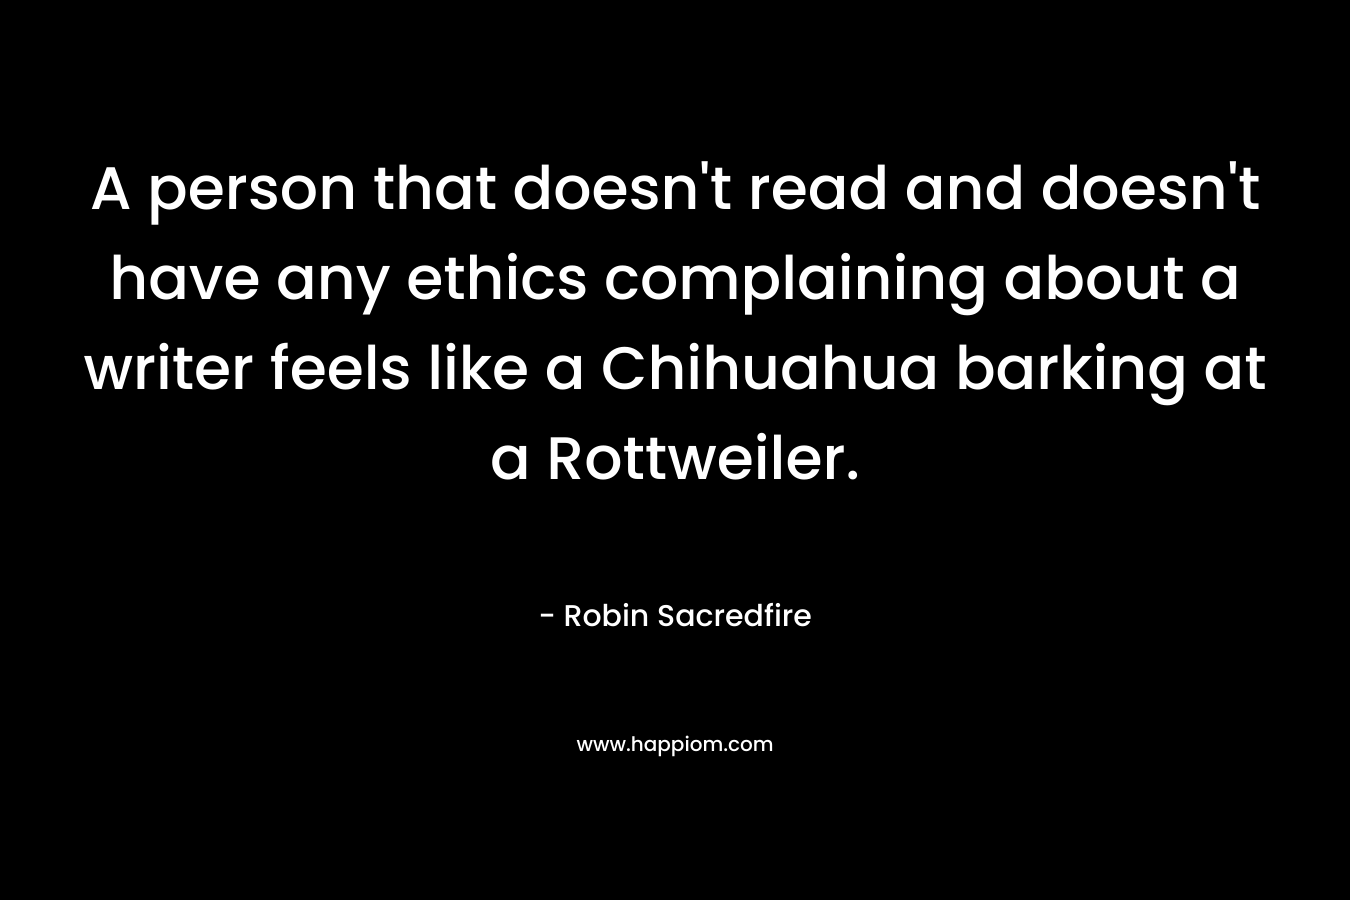 A person that doesn’t read and doesn’t have any ethics complaining about a writer feels like a Chihuahua barking at a Rottweiler. – Robin Sacredfire